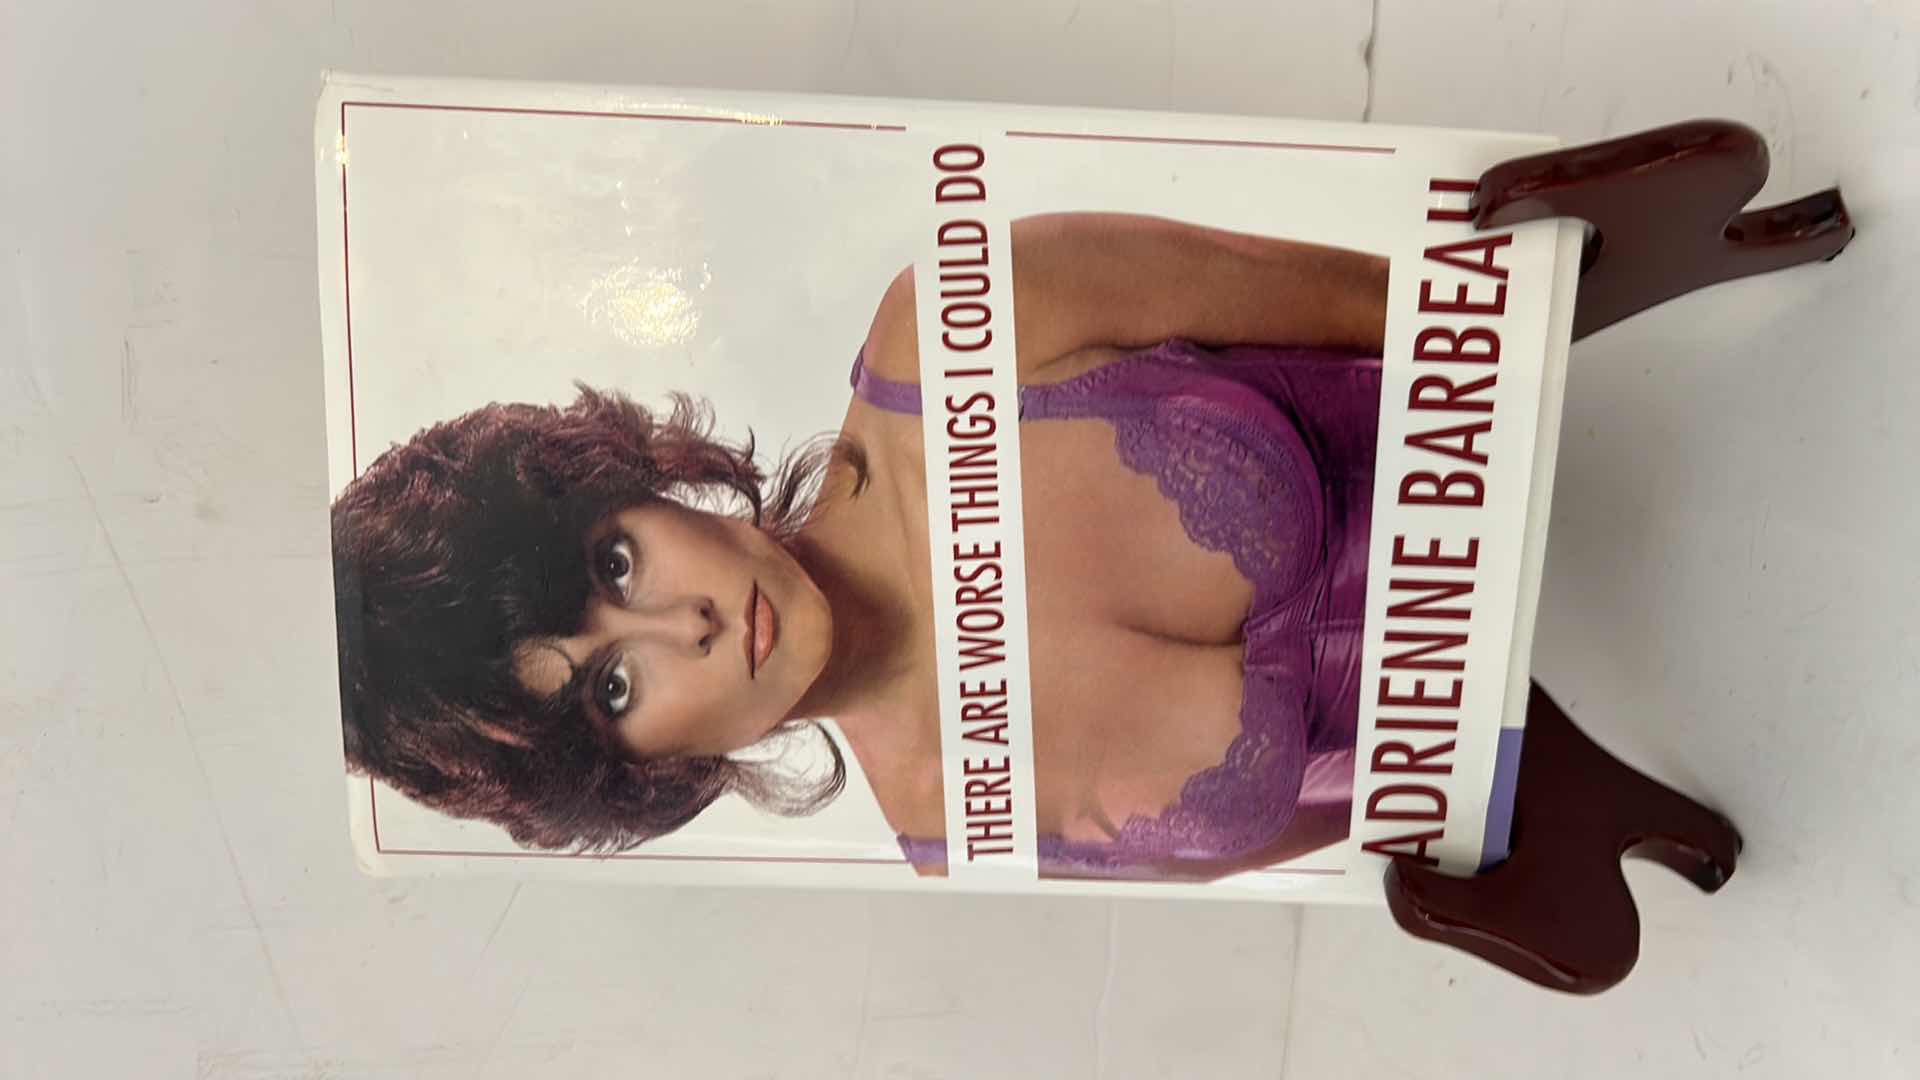 Photo 1 of AUTOGRAPHED HARDCOVER BOOK, “THERE ARE WORSE THINGS I COULD DO” ADRIENNE BARBEAU